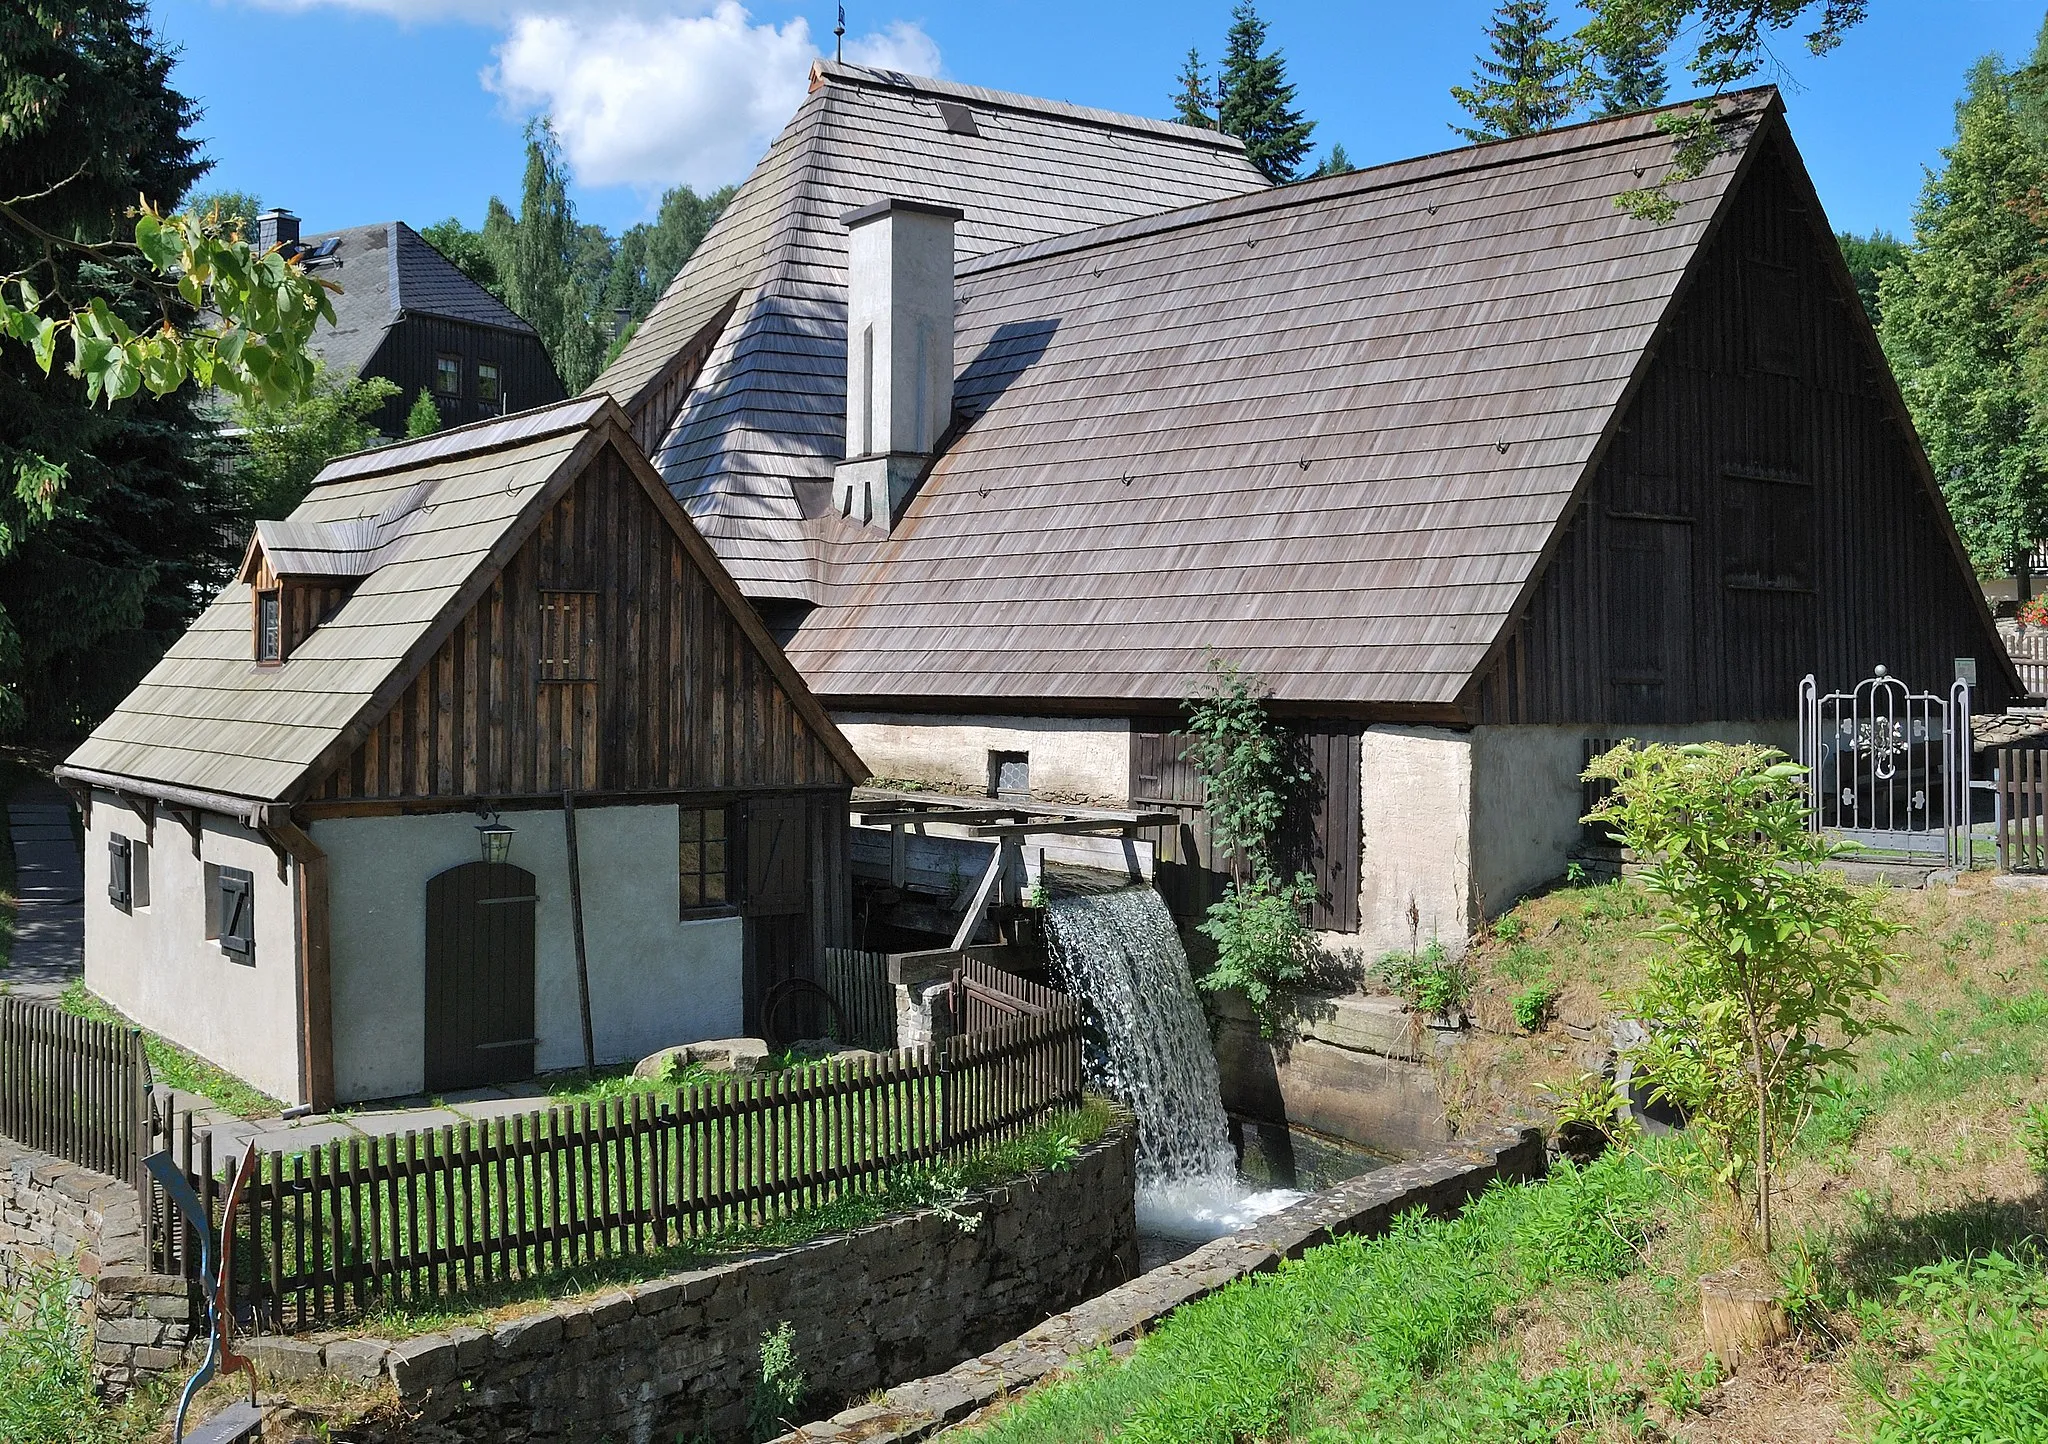 Photo showing: The historical hammer mill Frohnauer Hammer in Annaberg-Buchholz in Saxony, Germany.